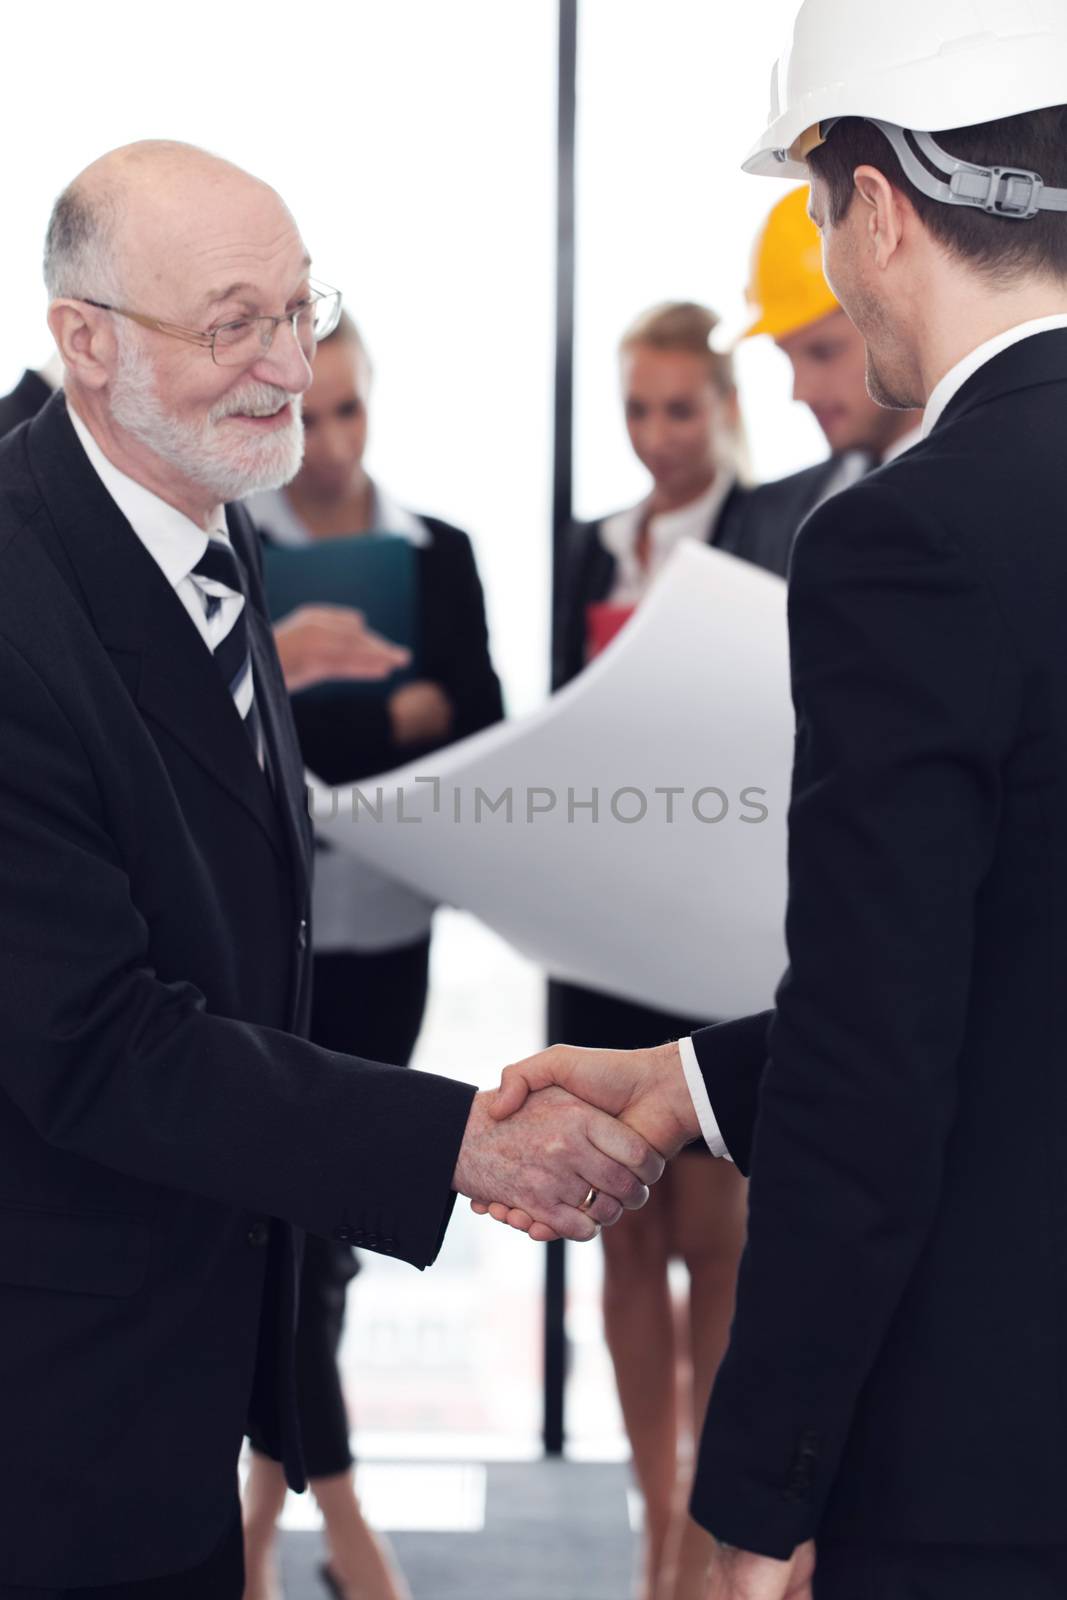 Handshake of architect and investor by ALotOfPeople